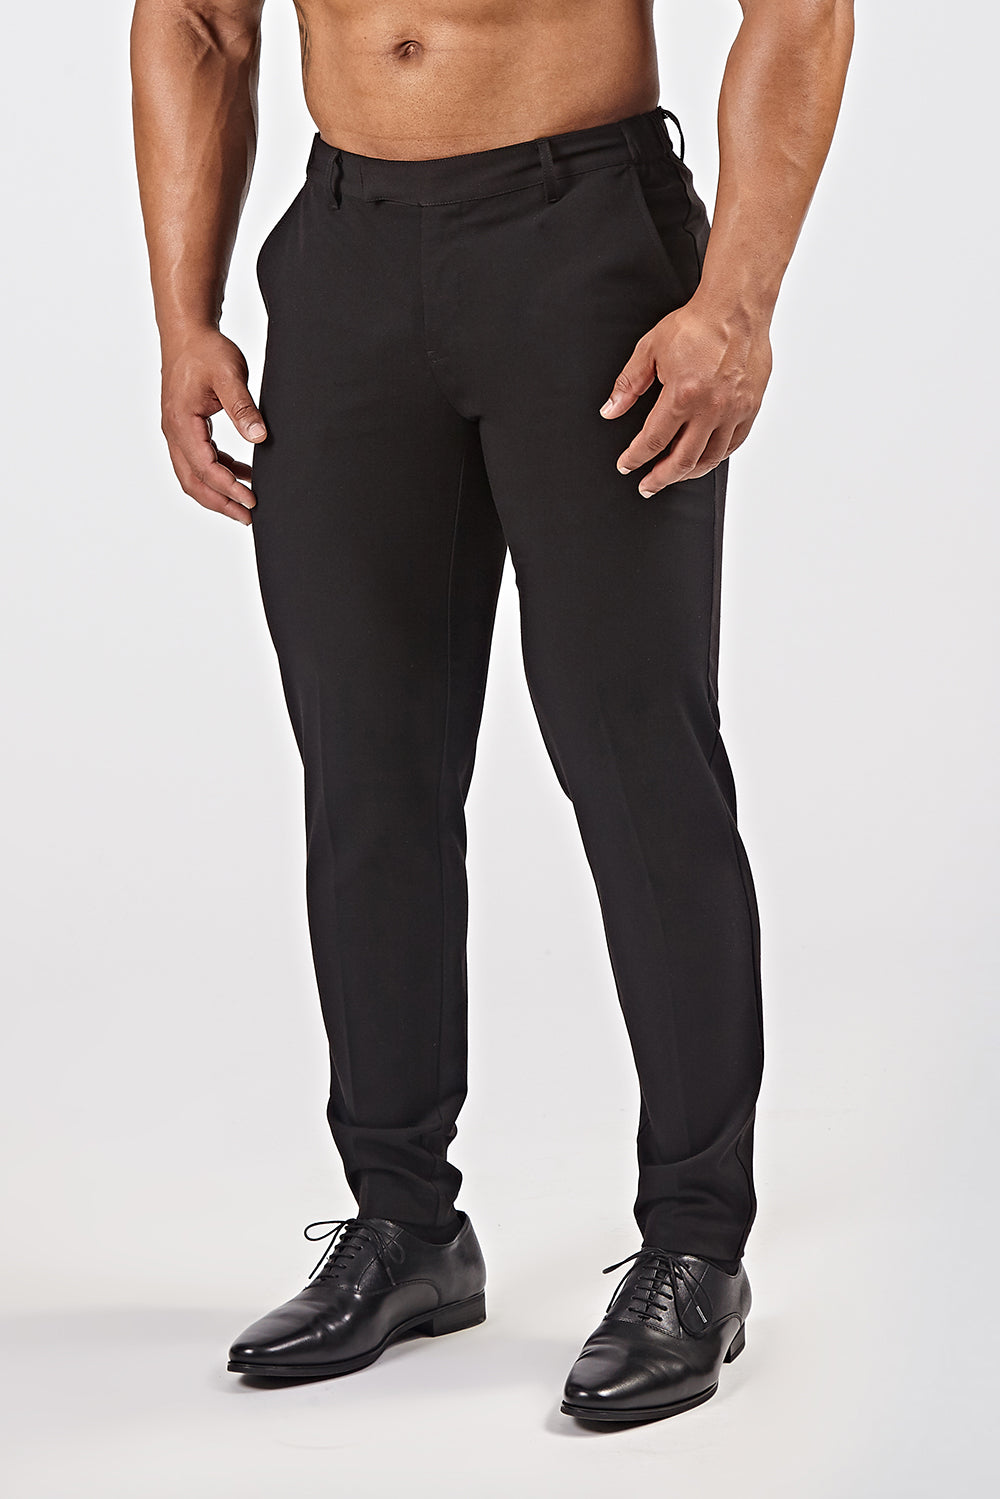 Athletic Fit Jeans - Tailored Athlete - TAILORED ATHLETE - USA